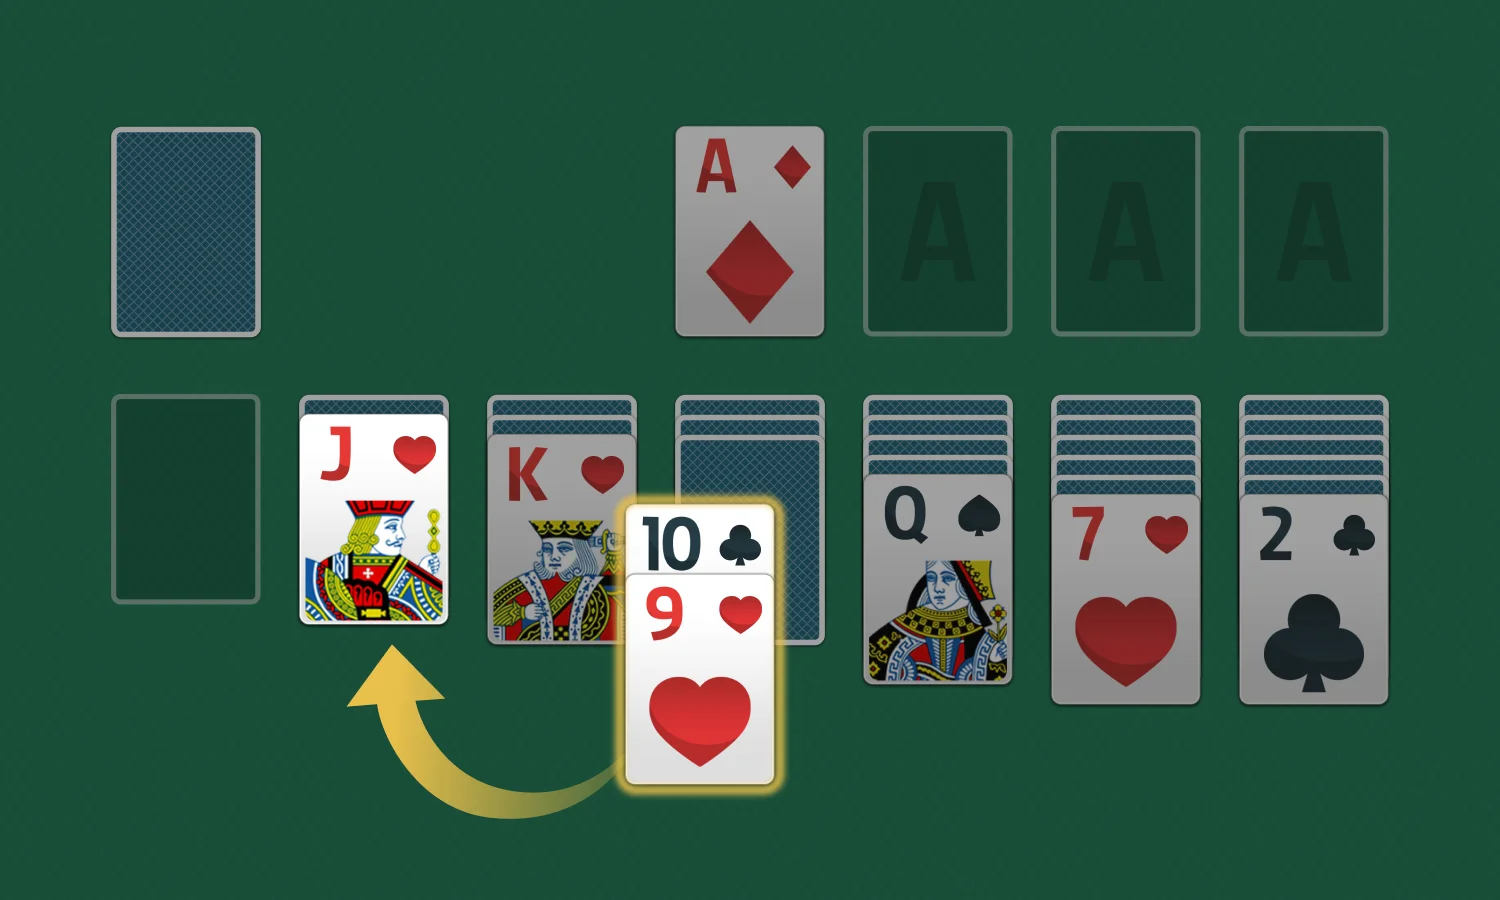 Solitaire Stratefies: Stack Sequences of Cards